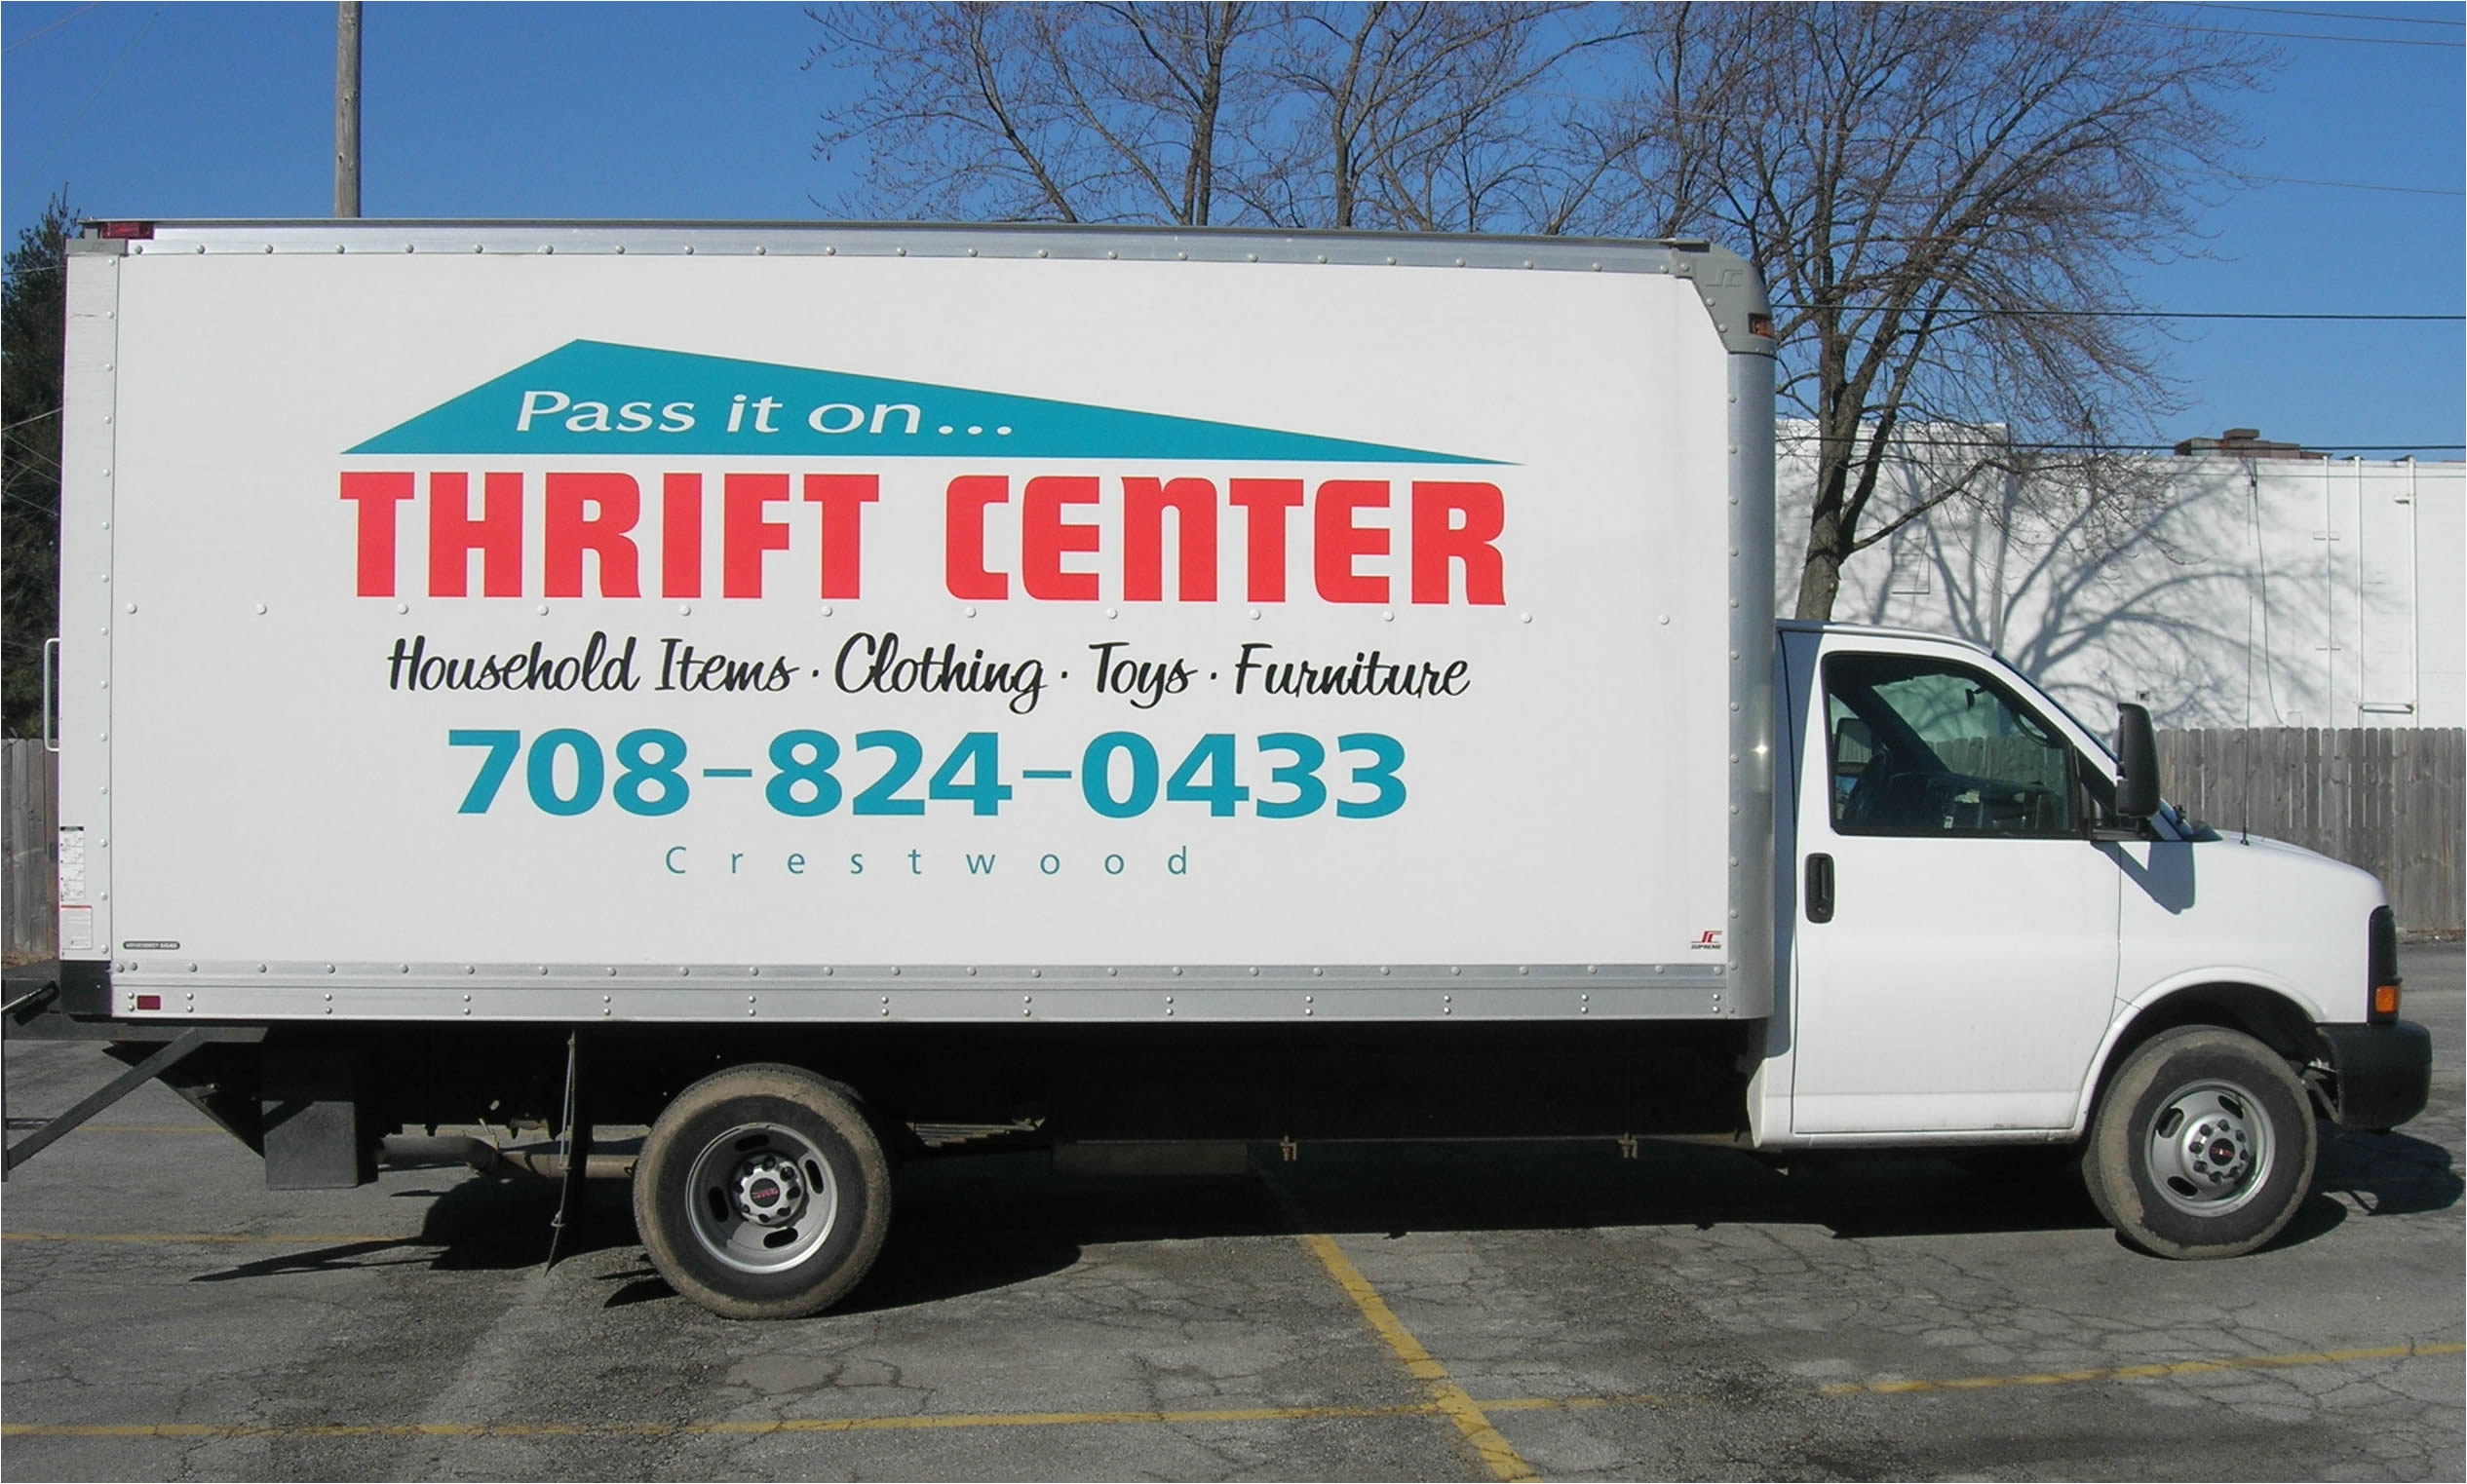 to better serve our customers a small truck was purchased so that pick up and delivery service could be offered volunteers pick up or deliver furniture